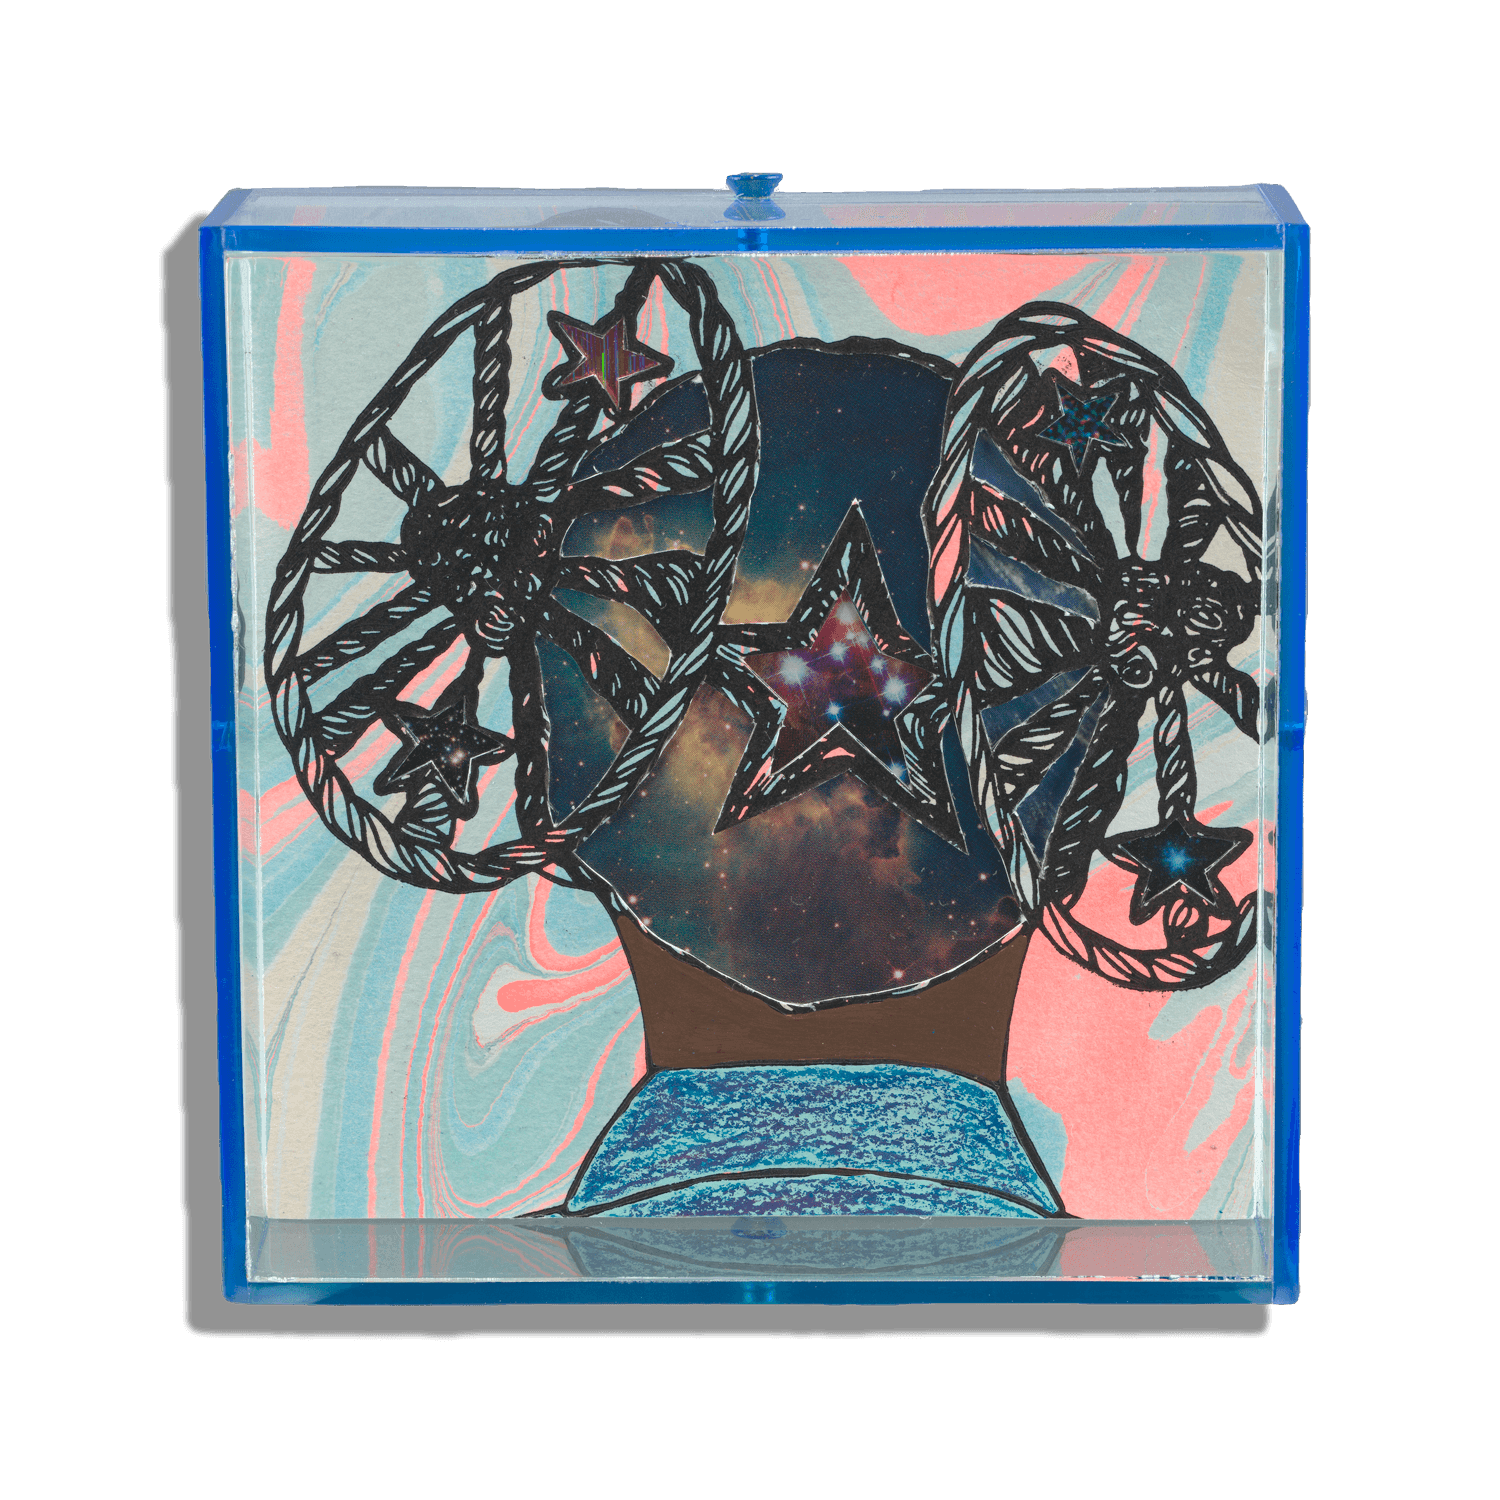 A collage piece depicting the back of a young black girls head with her hair braided into two large wheels.